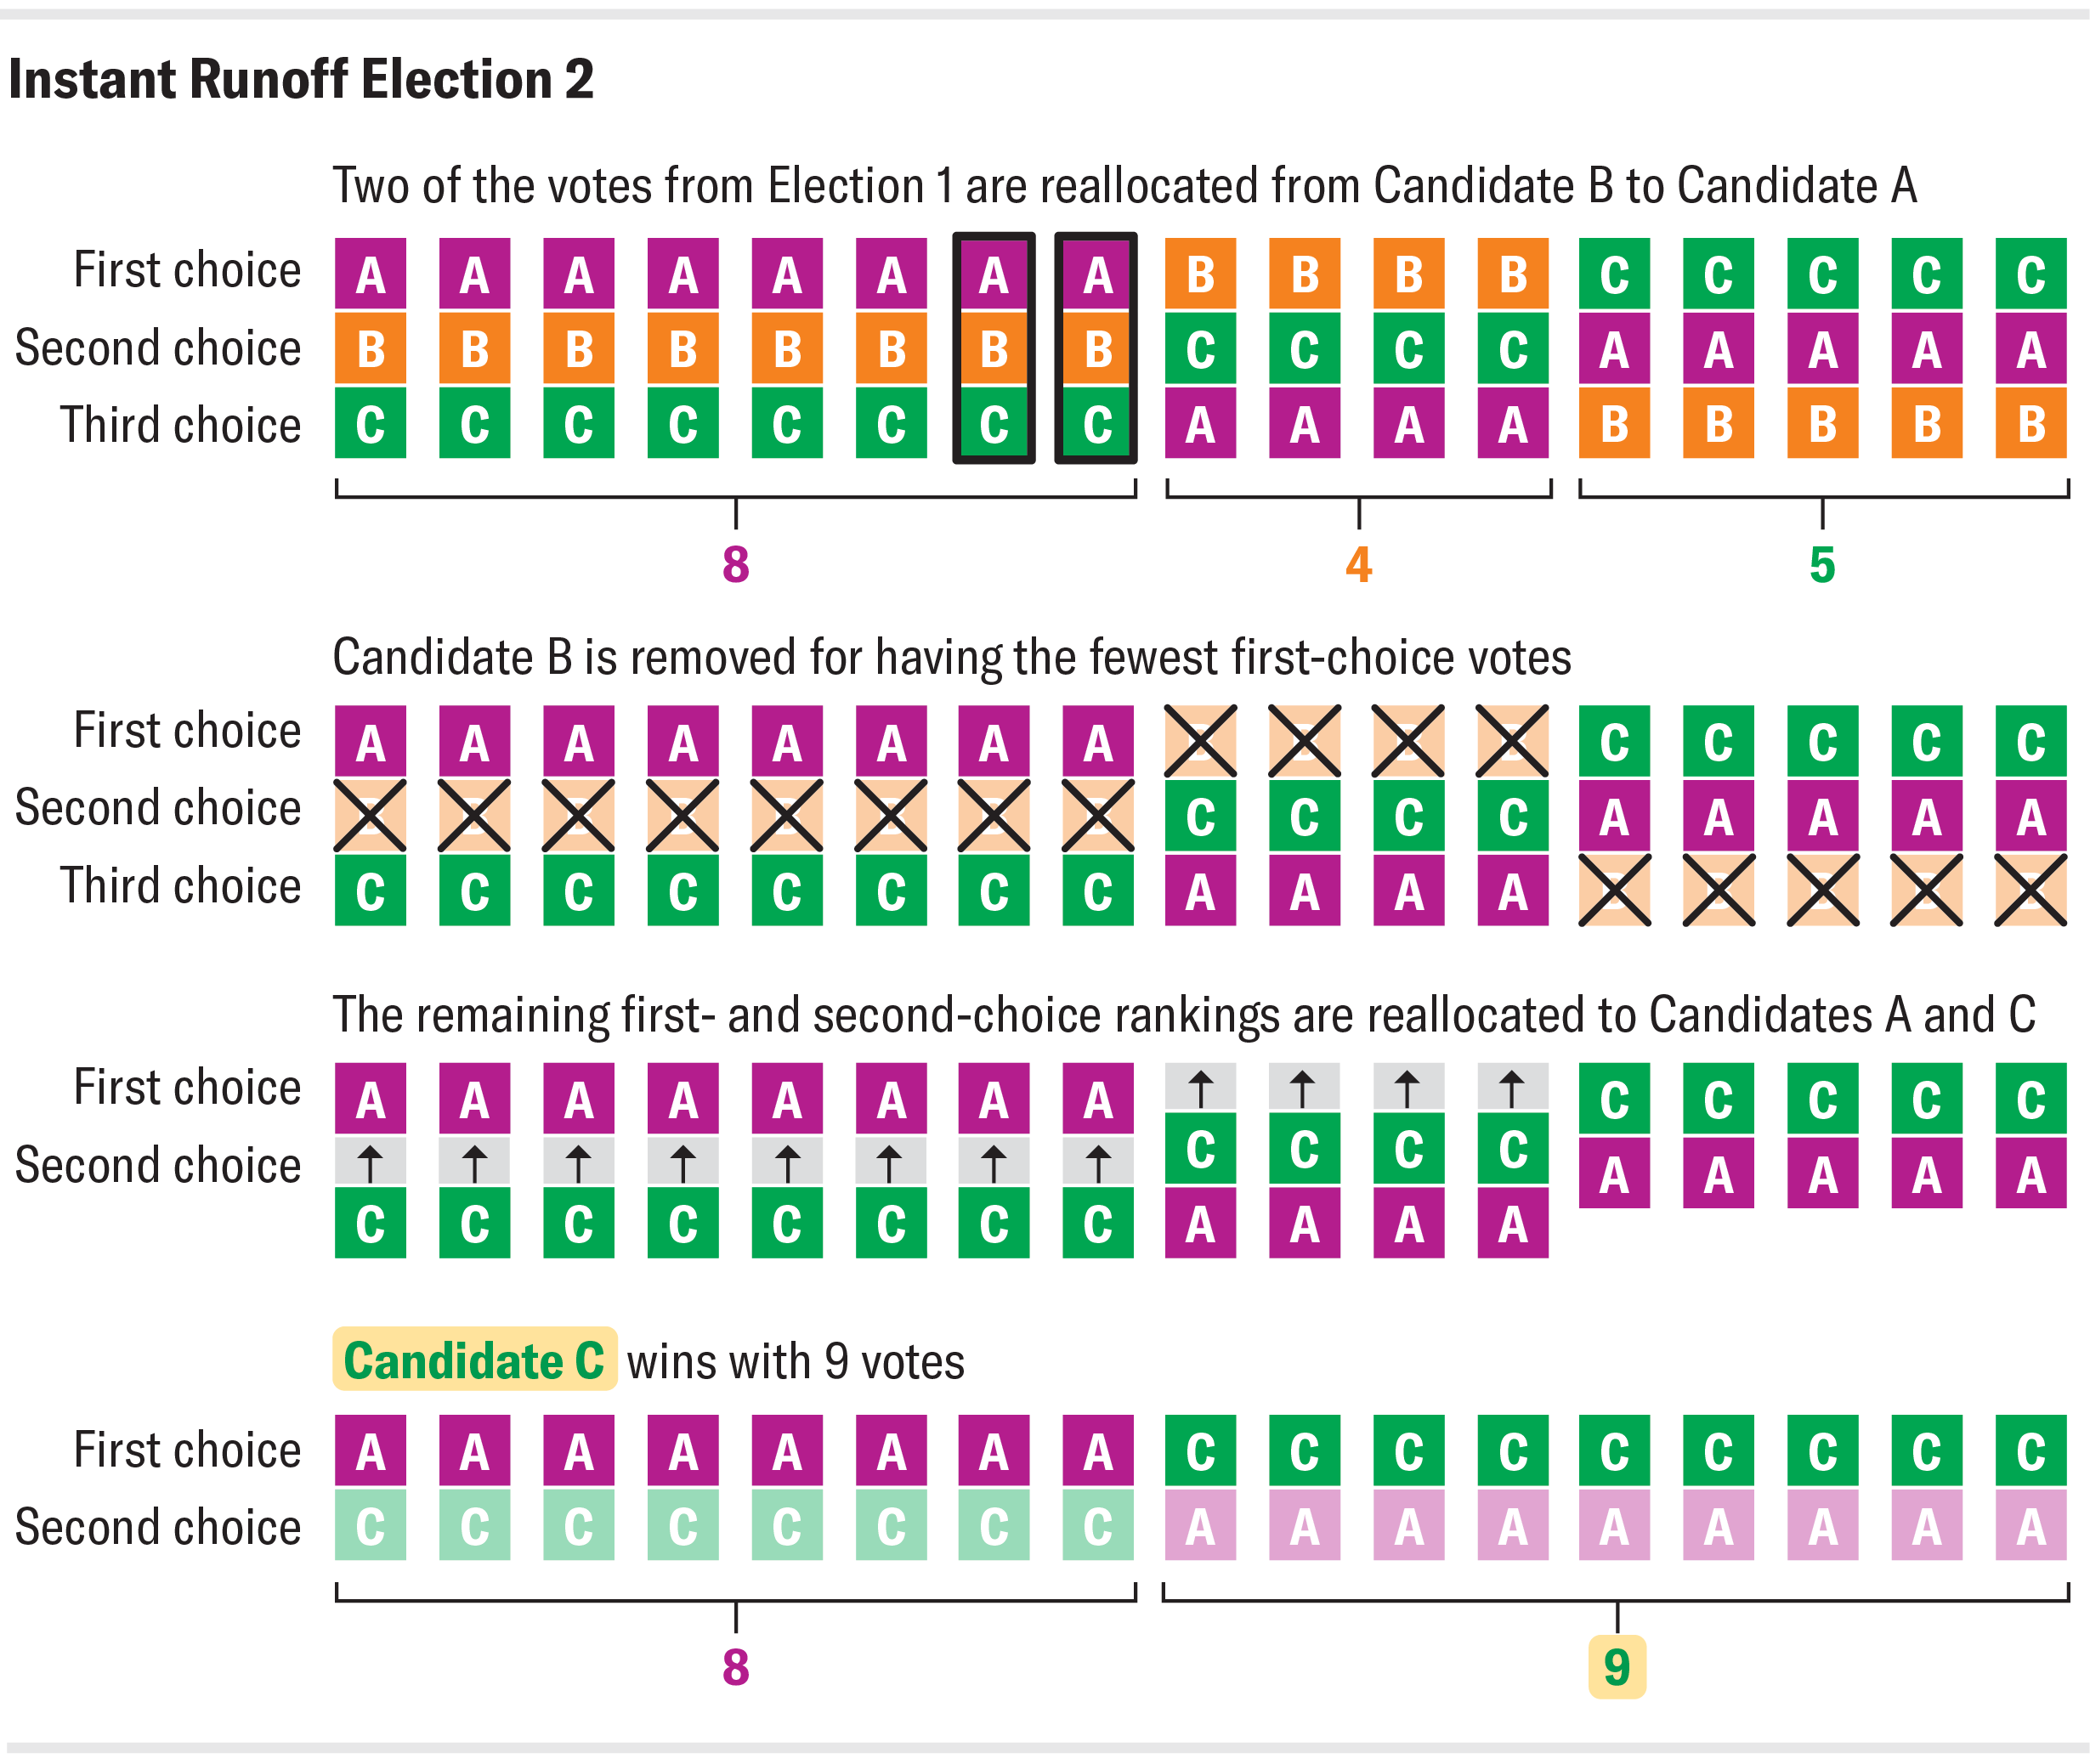 Graphic shows the instant runoff Election 2 scenario, in which Candidate A starts out with two additional votes yet loses to Candidate C.